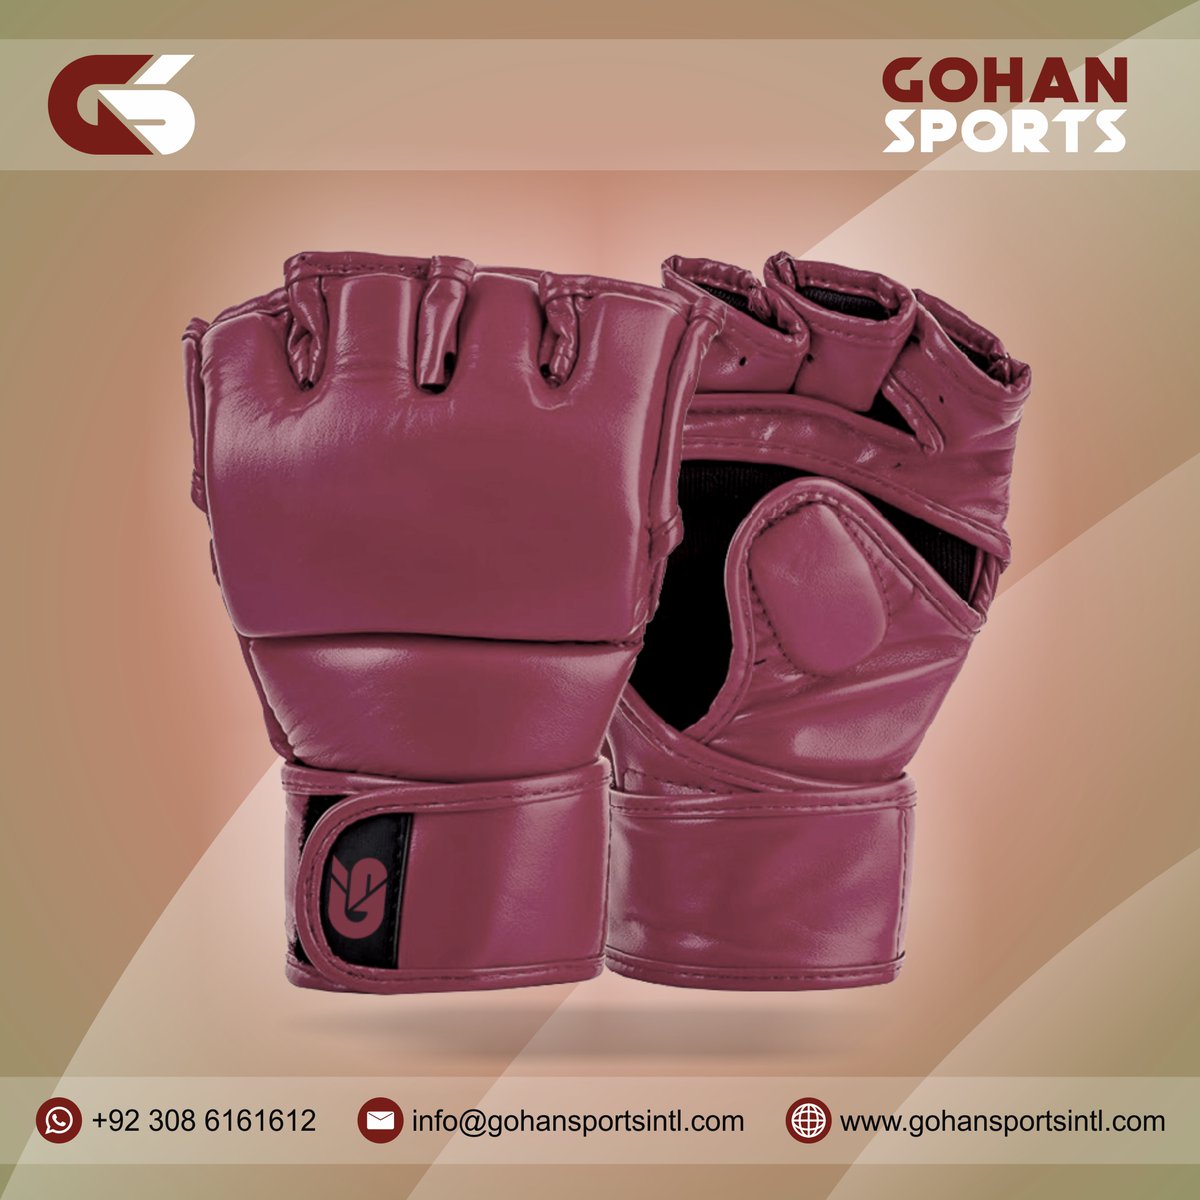 Pure Leather MMA Grappling Glove
#boxing  #mma #gym #Workout #workoutmotivation #Boxinggear  #title #titleboxingclub #titleboxing #fightgear #combatgear #training #trainingday #boxinggear #mmagear #boxingglove #grappling  #MCD #CletoReyes #Everlast #karate #martialarts #bjj